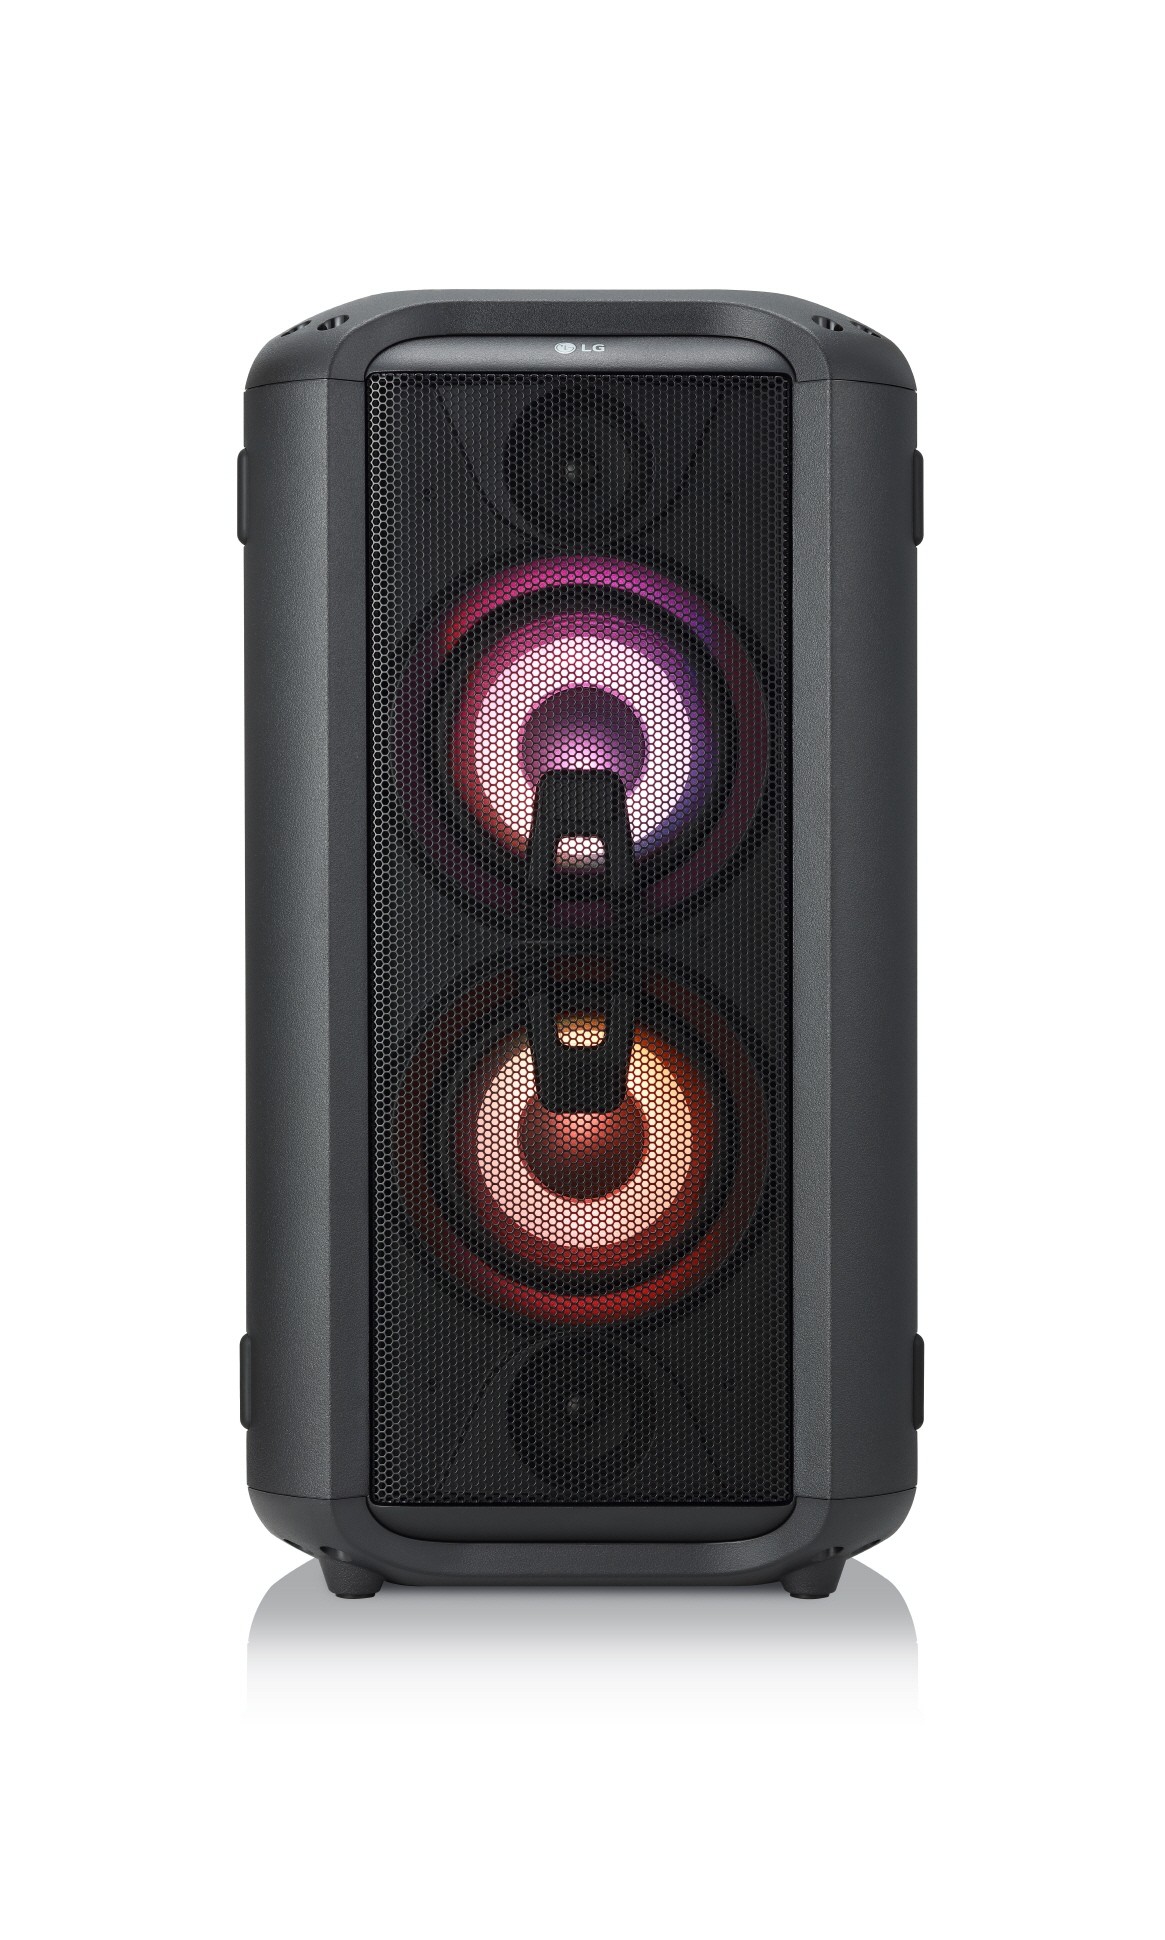 A front view of LG XBOOM model RL4